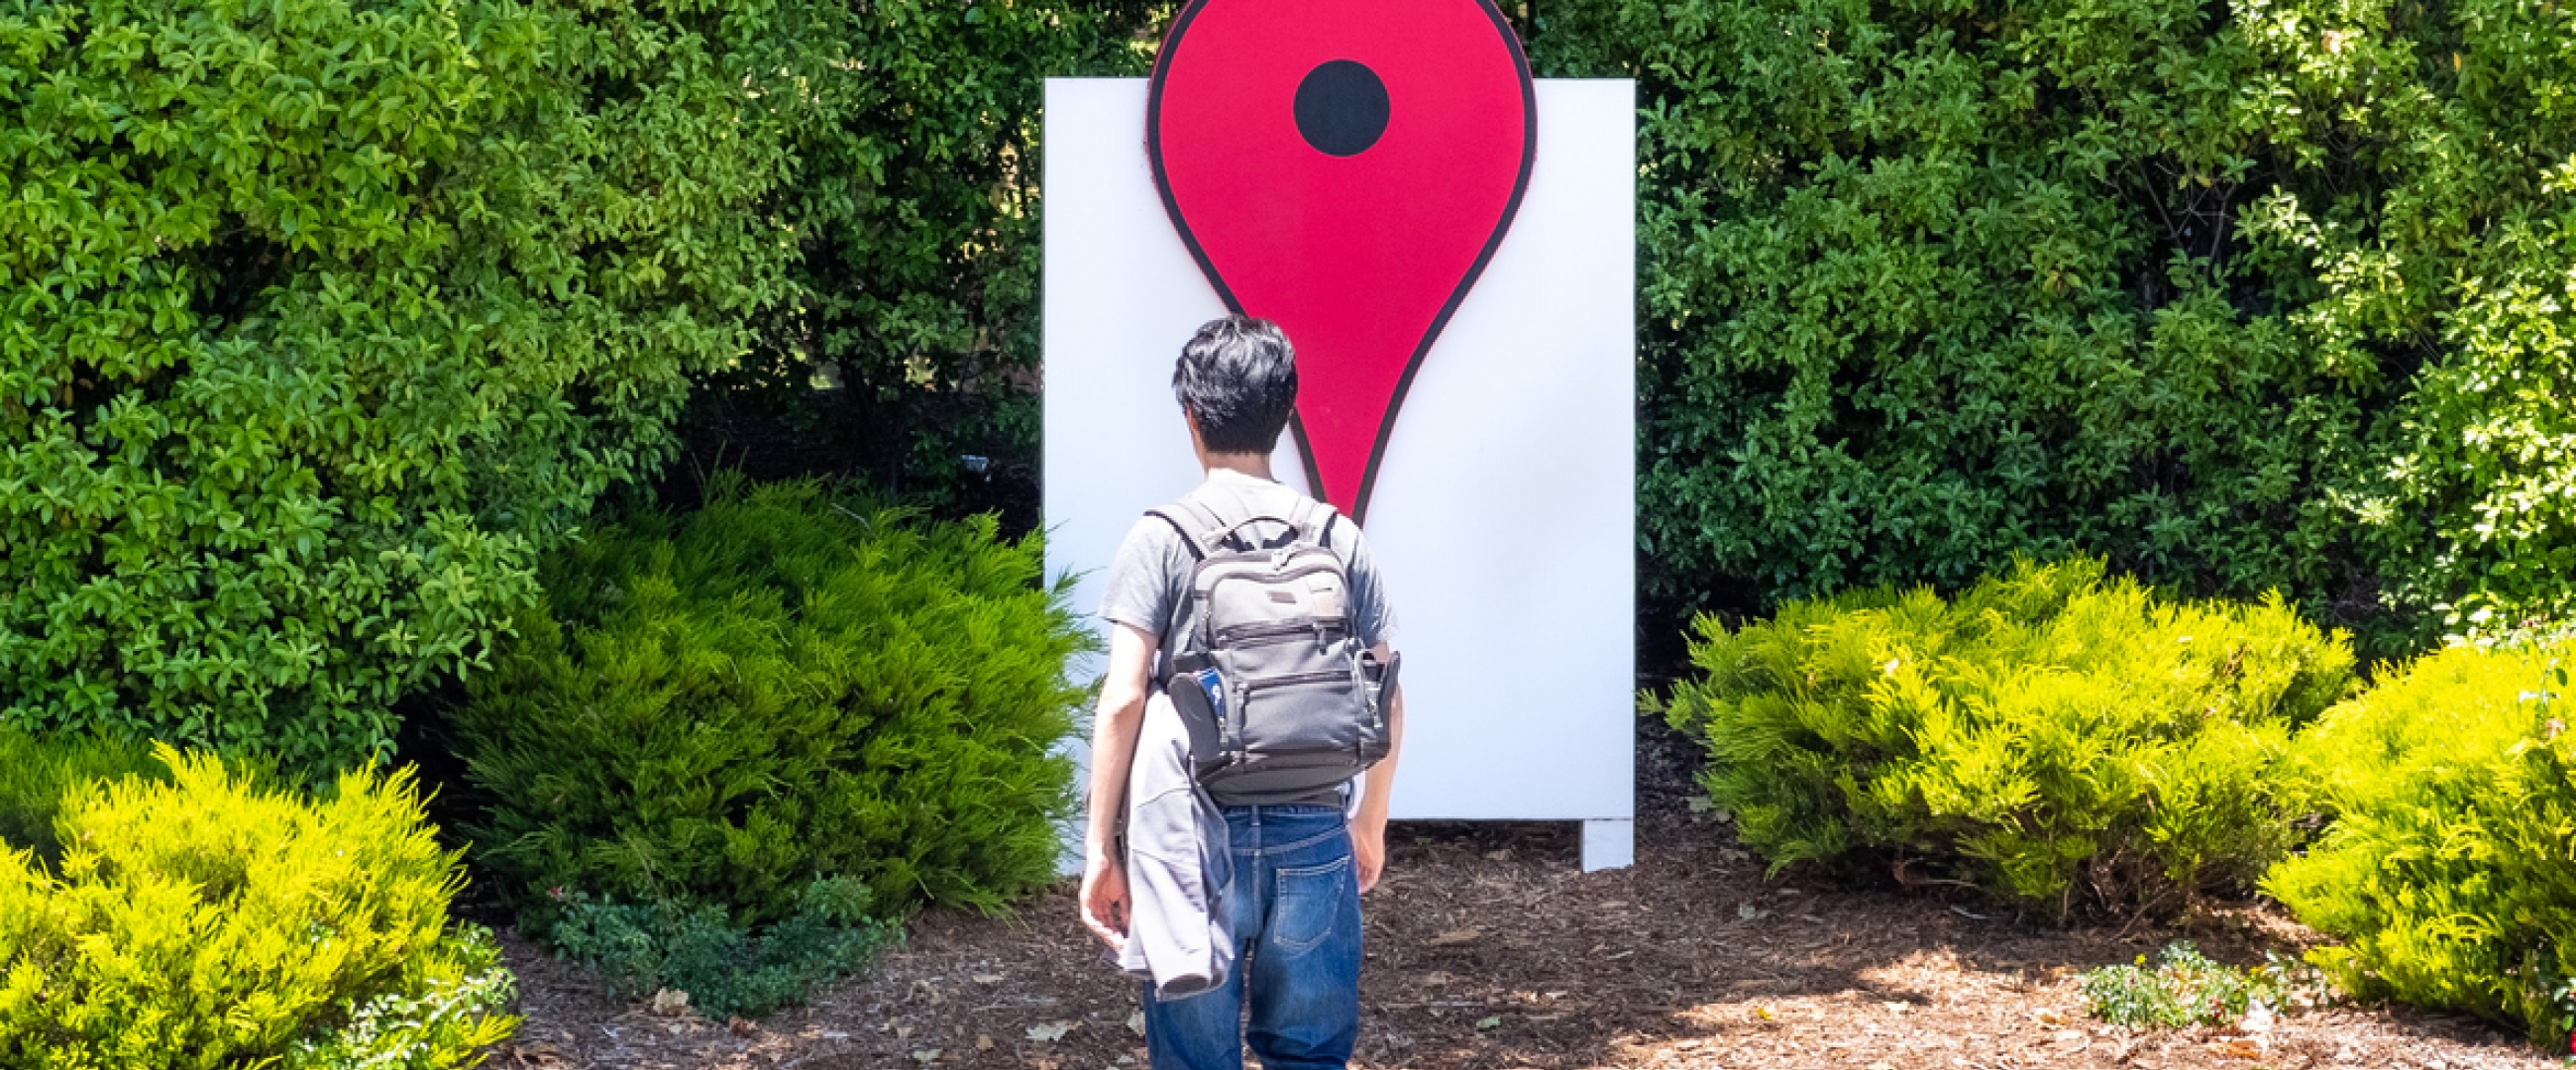 June 4, 2019 Mountain View / CA / USA - The Google Maps Icon near their offices in the Google campus (Googleplex) in Silicon Valley; employee crossing the street; south San Francisco bay area